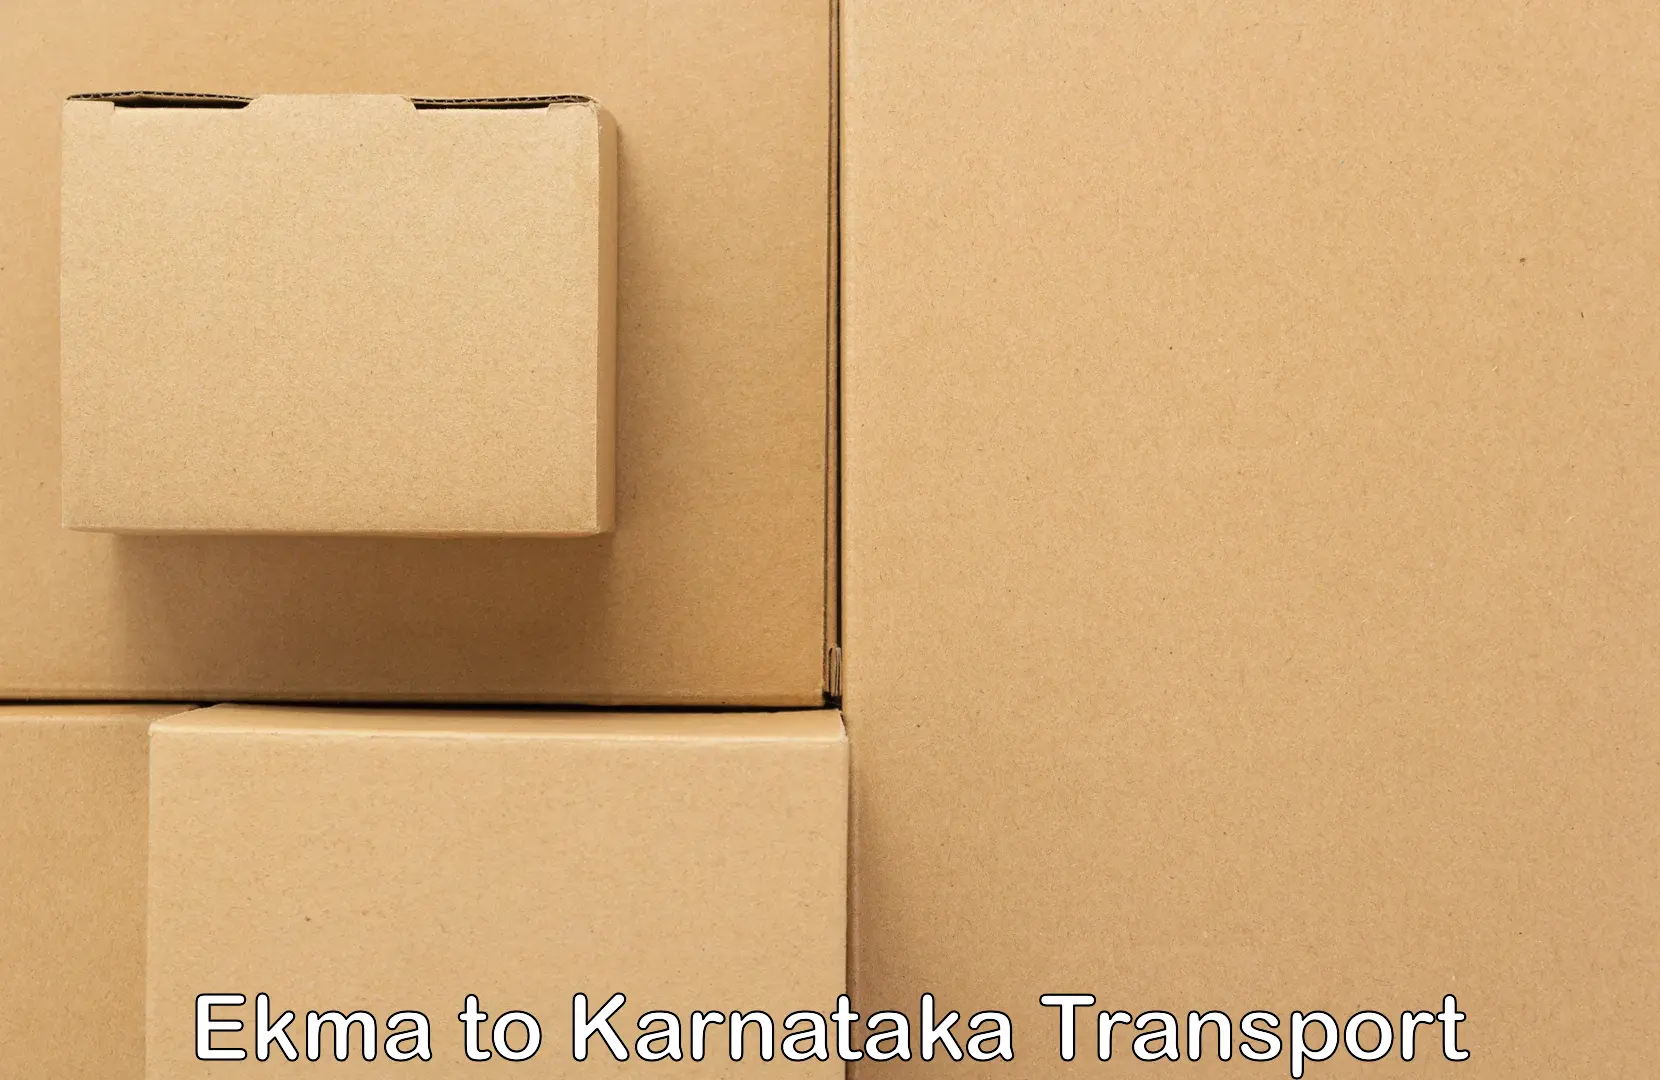 Commercial transport service Ekma to Manipal